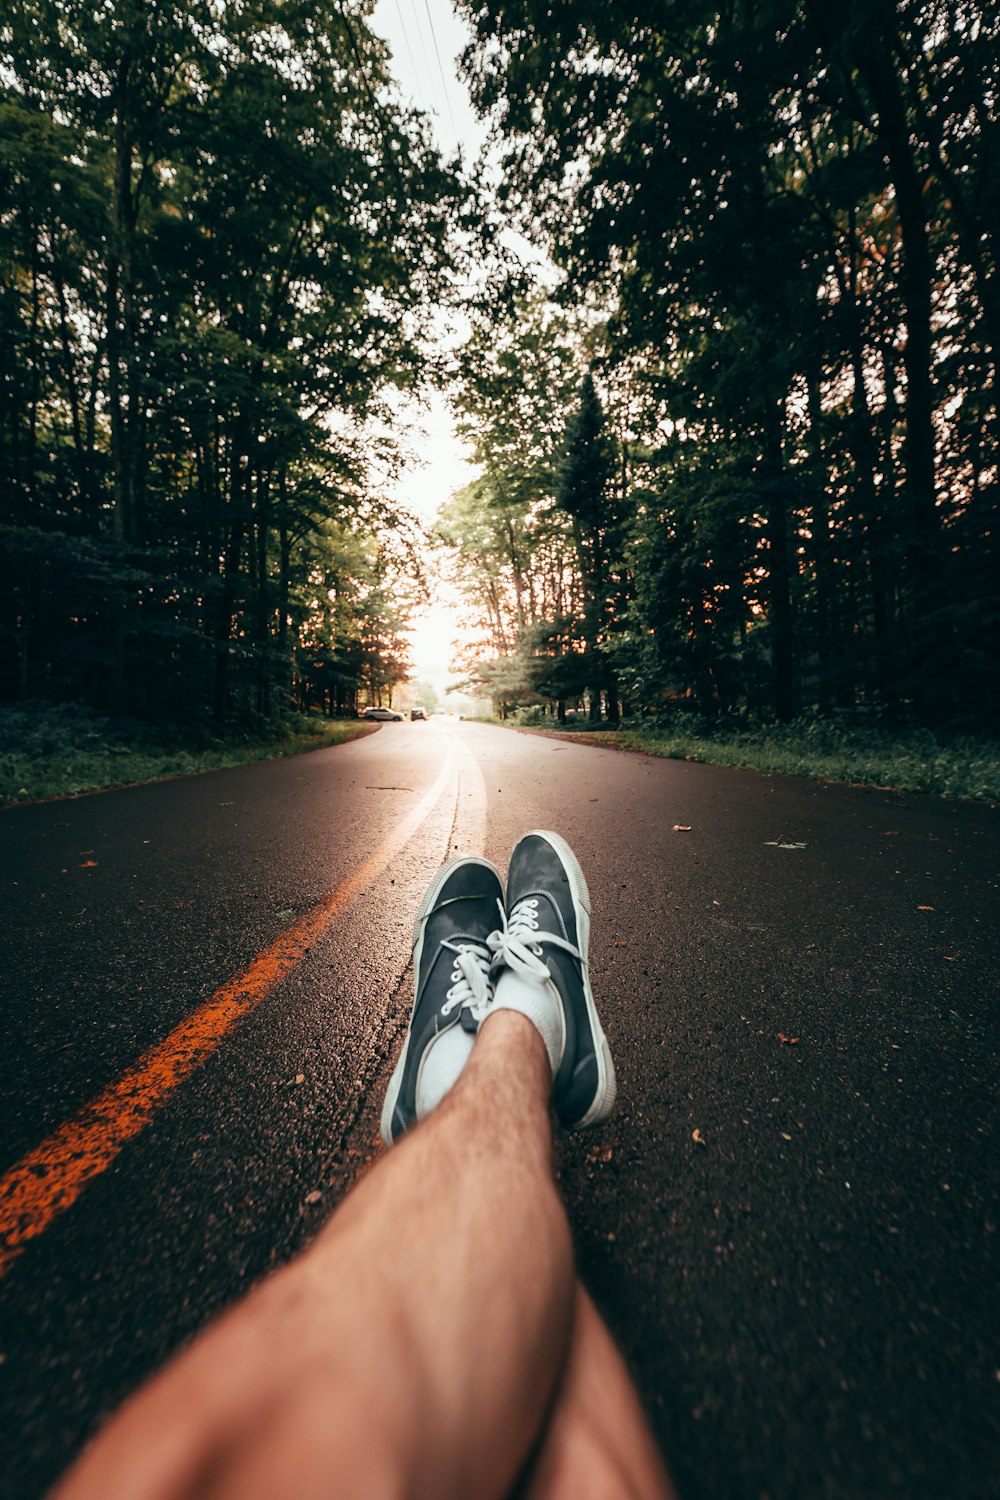 person in gray and white nike sneakers on gray asphalt road during daytime